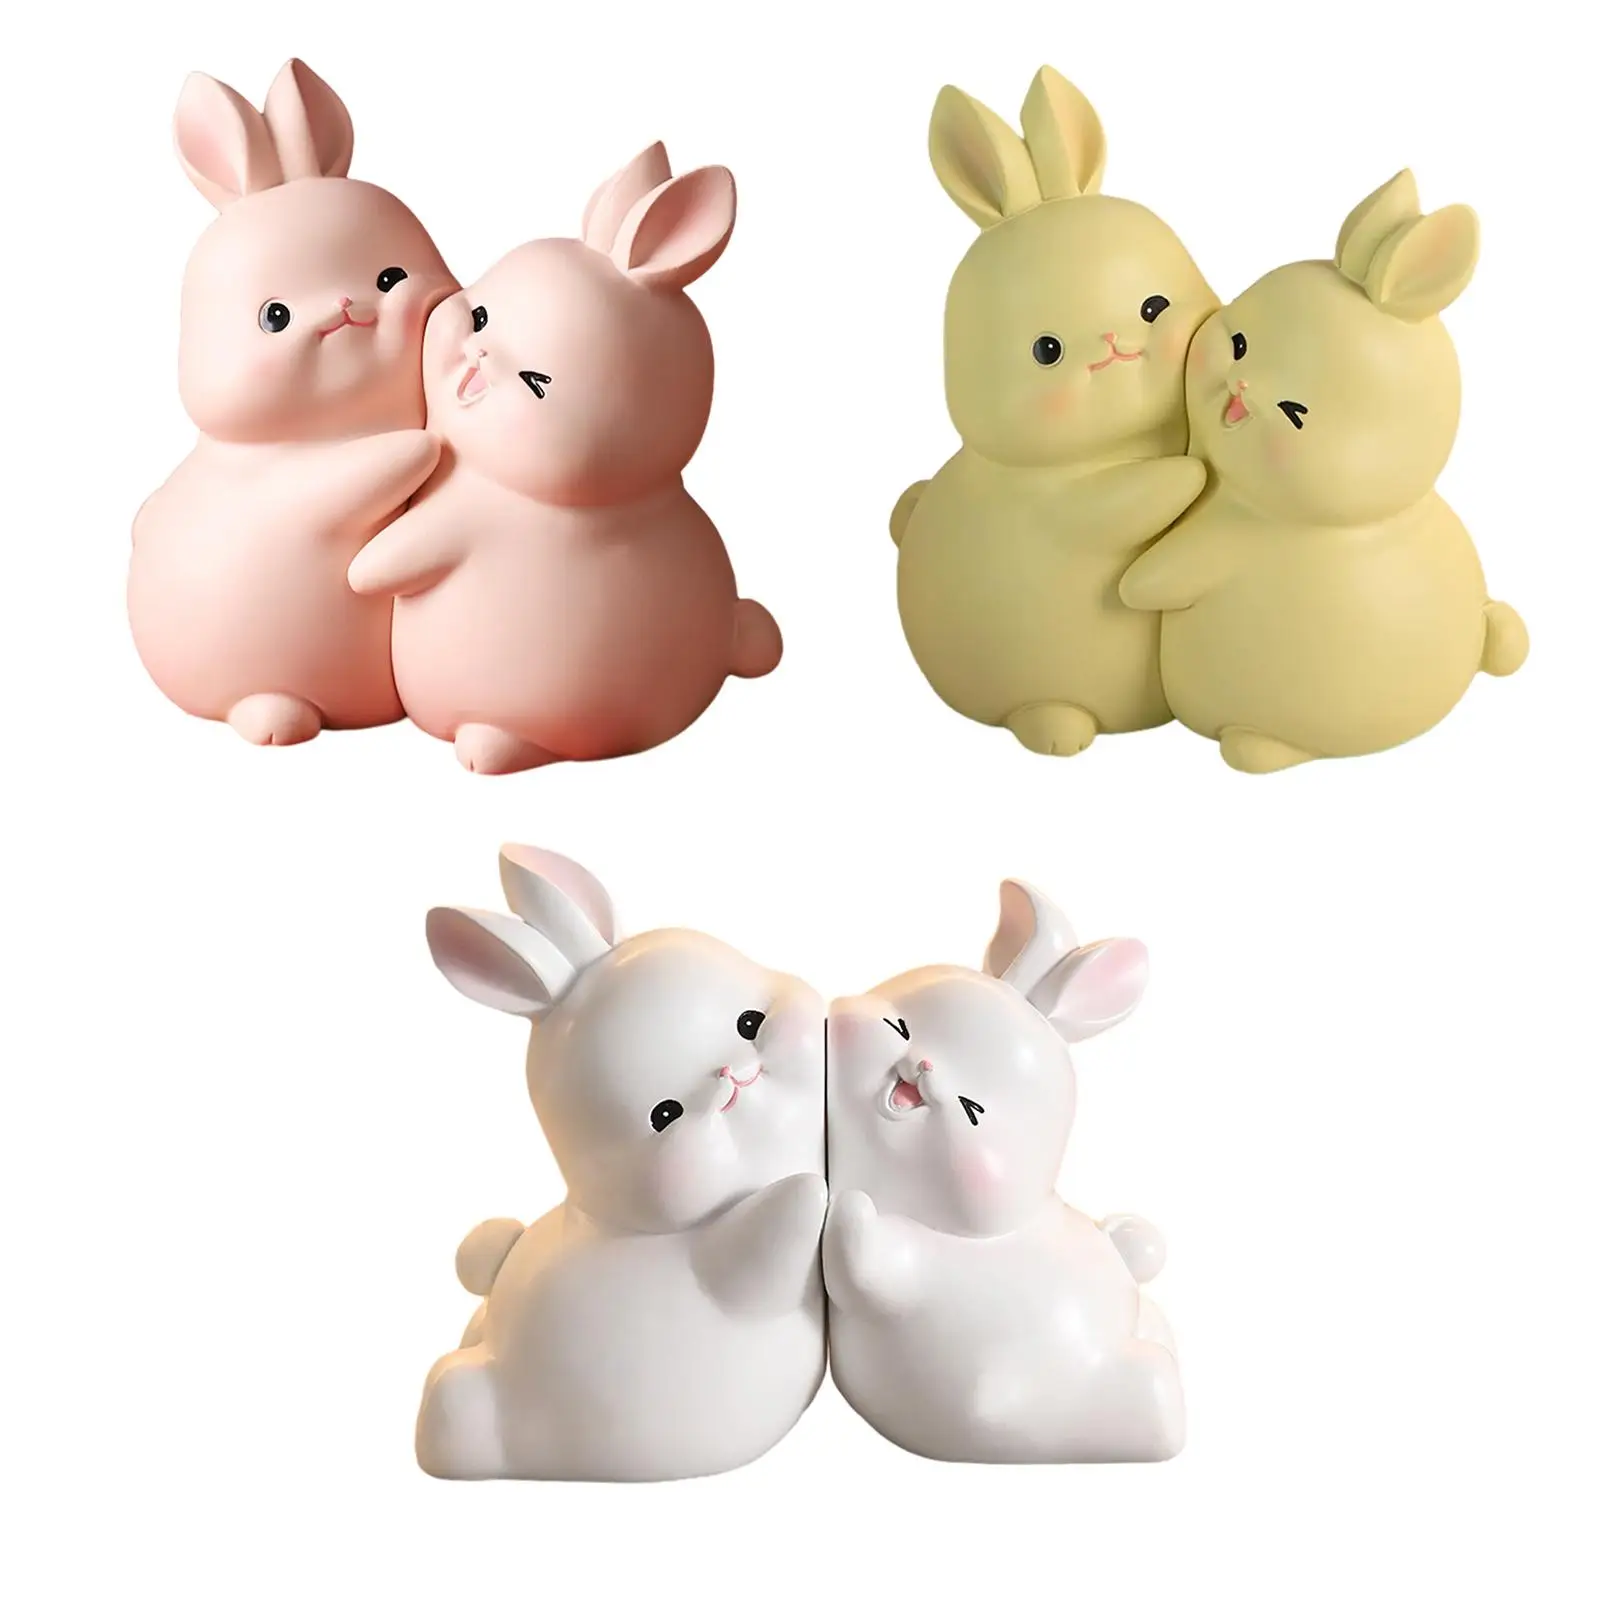 Rabbit Bookends Lovely Resin Animal Figurines Book Organizer Support Book Ends to Hold Books for Shelves Home Cabinet Desk Decor